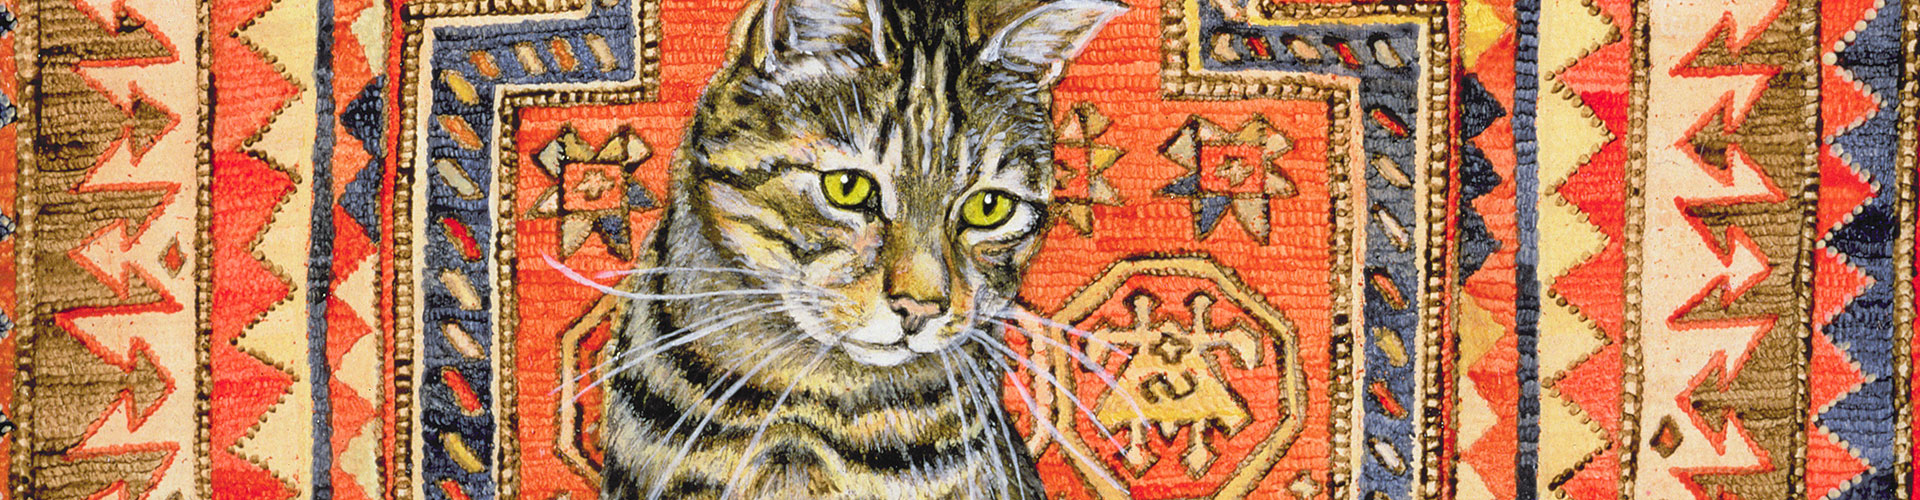 The Carpet-Cat, Greeting Card by Ditz   - Featured on Desktop Devices